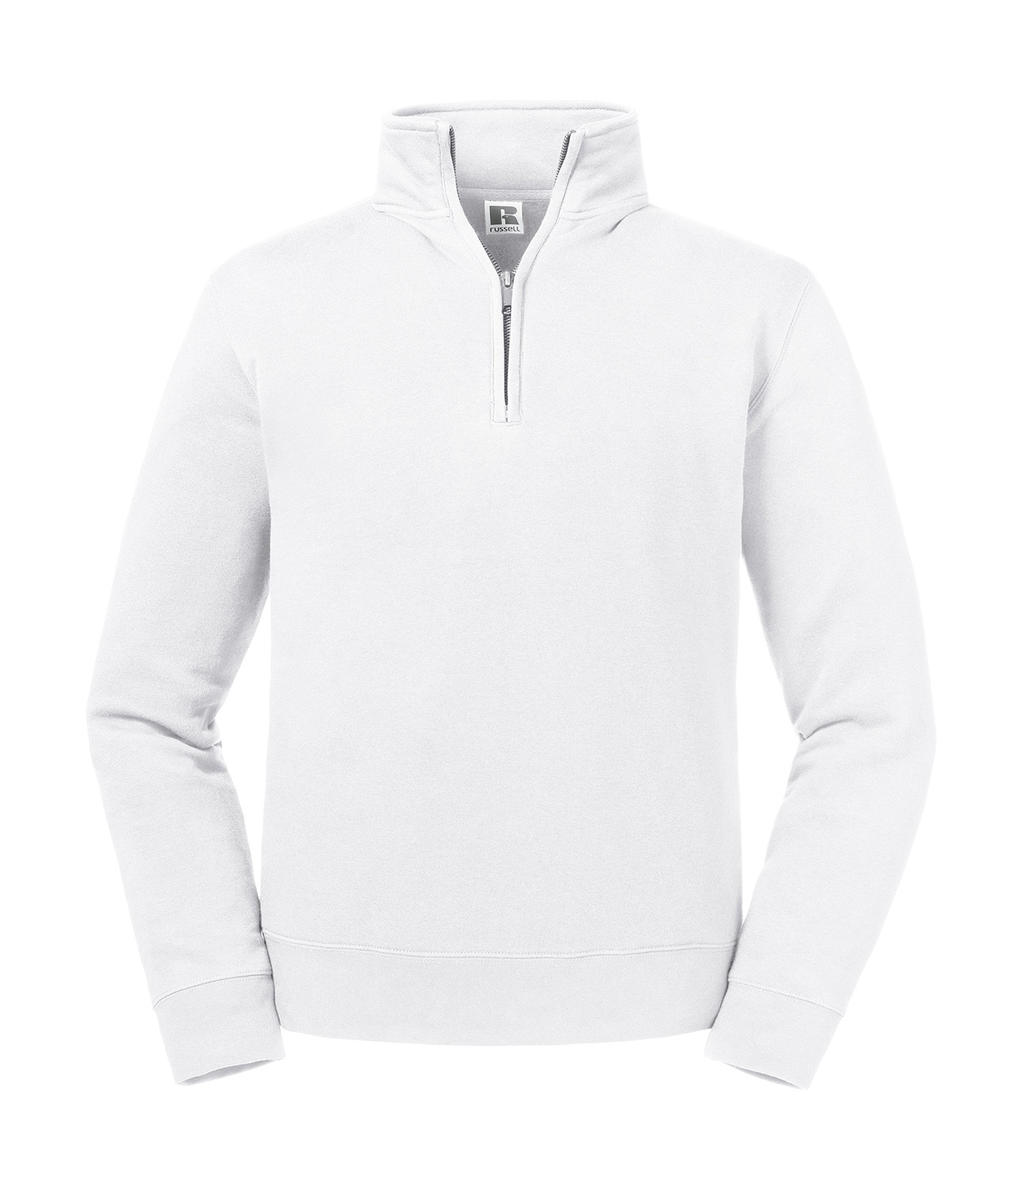  Authentic 1/4 Zip Sweat in Farbe White